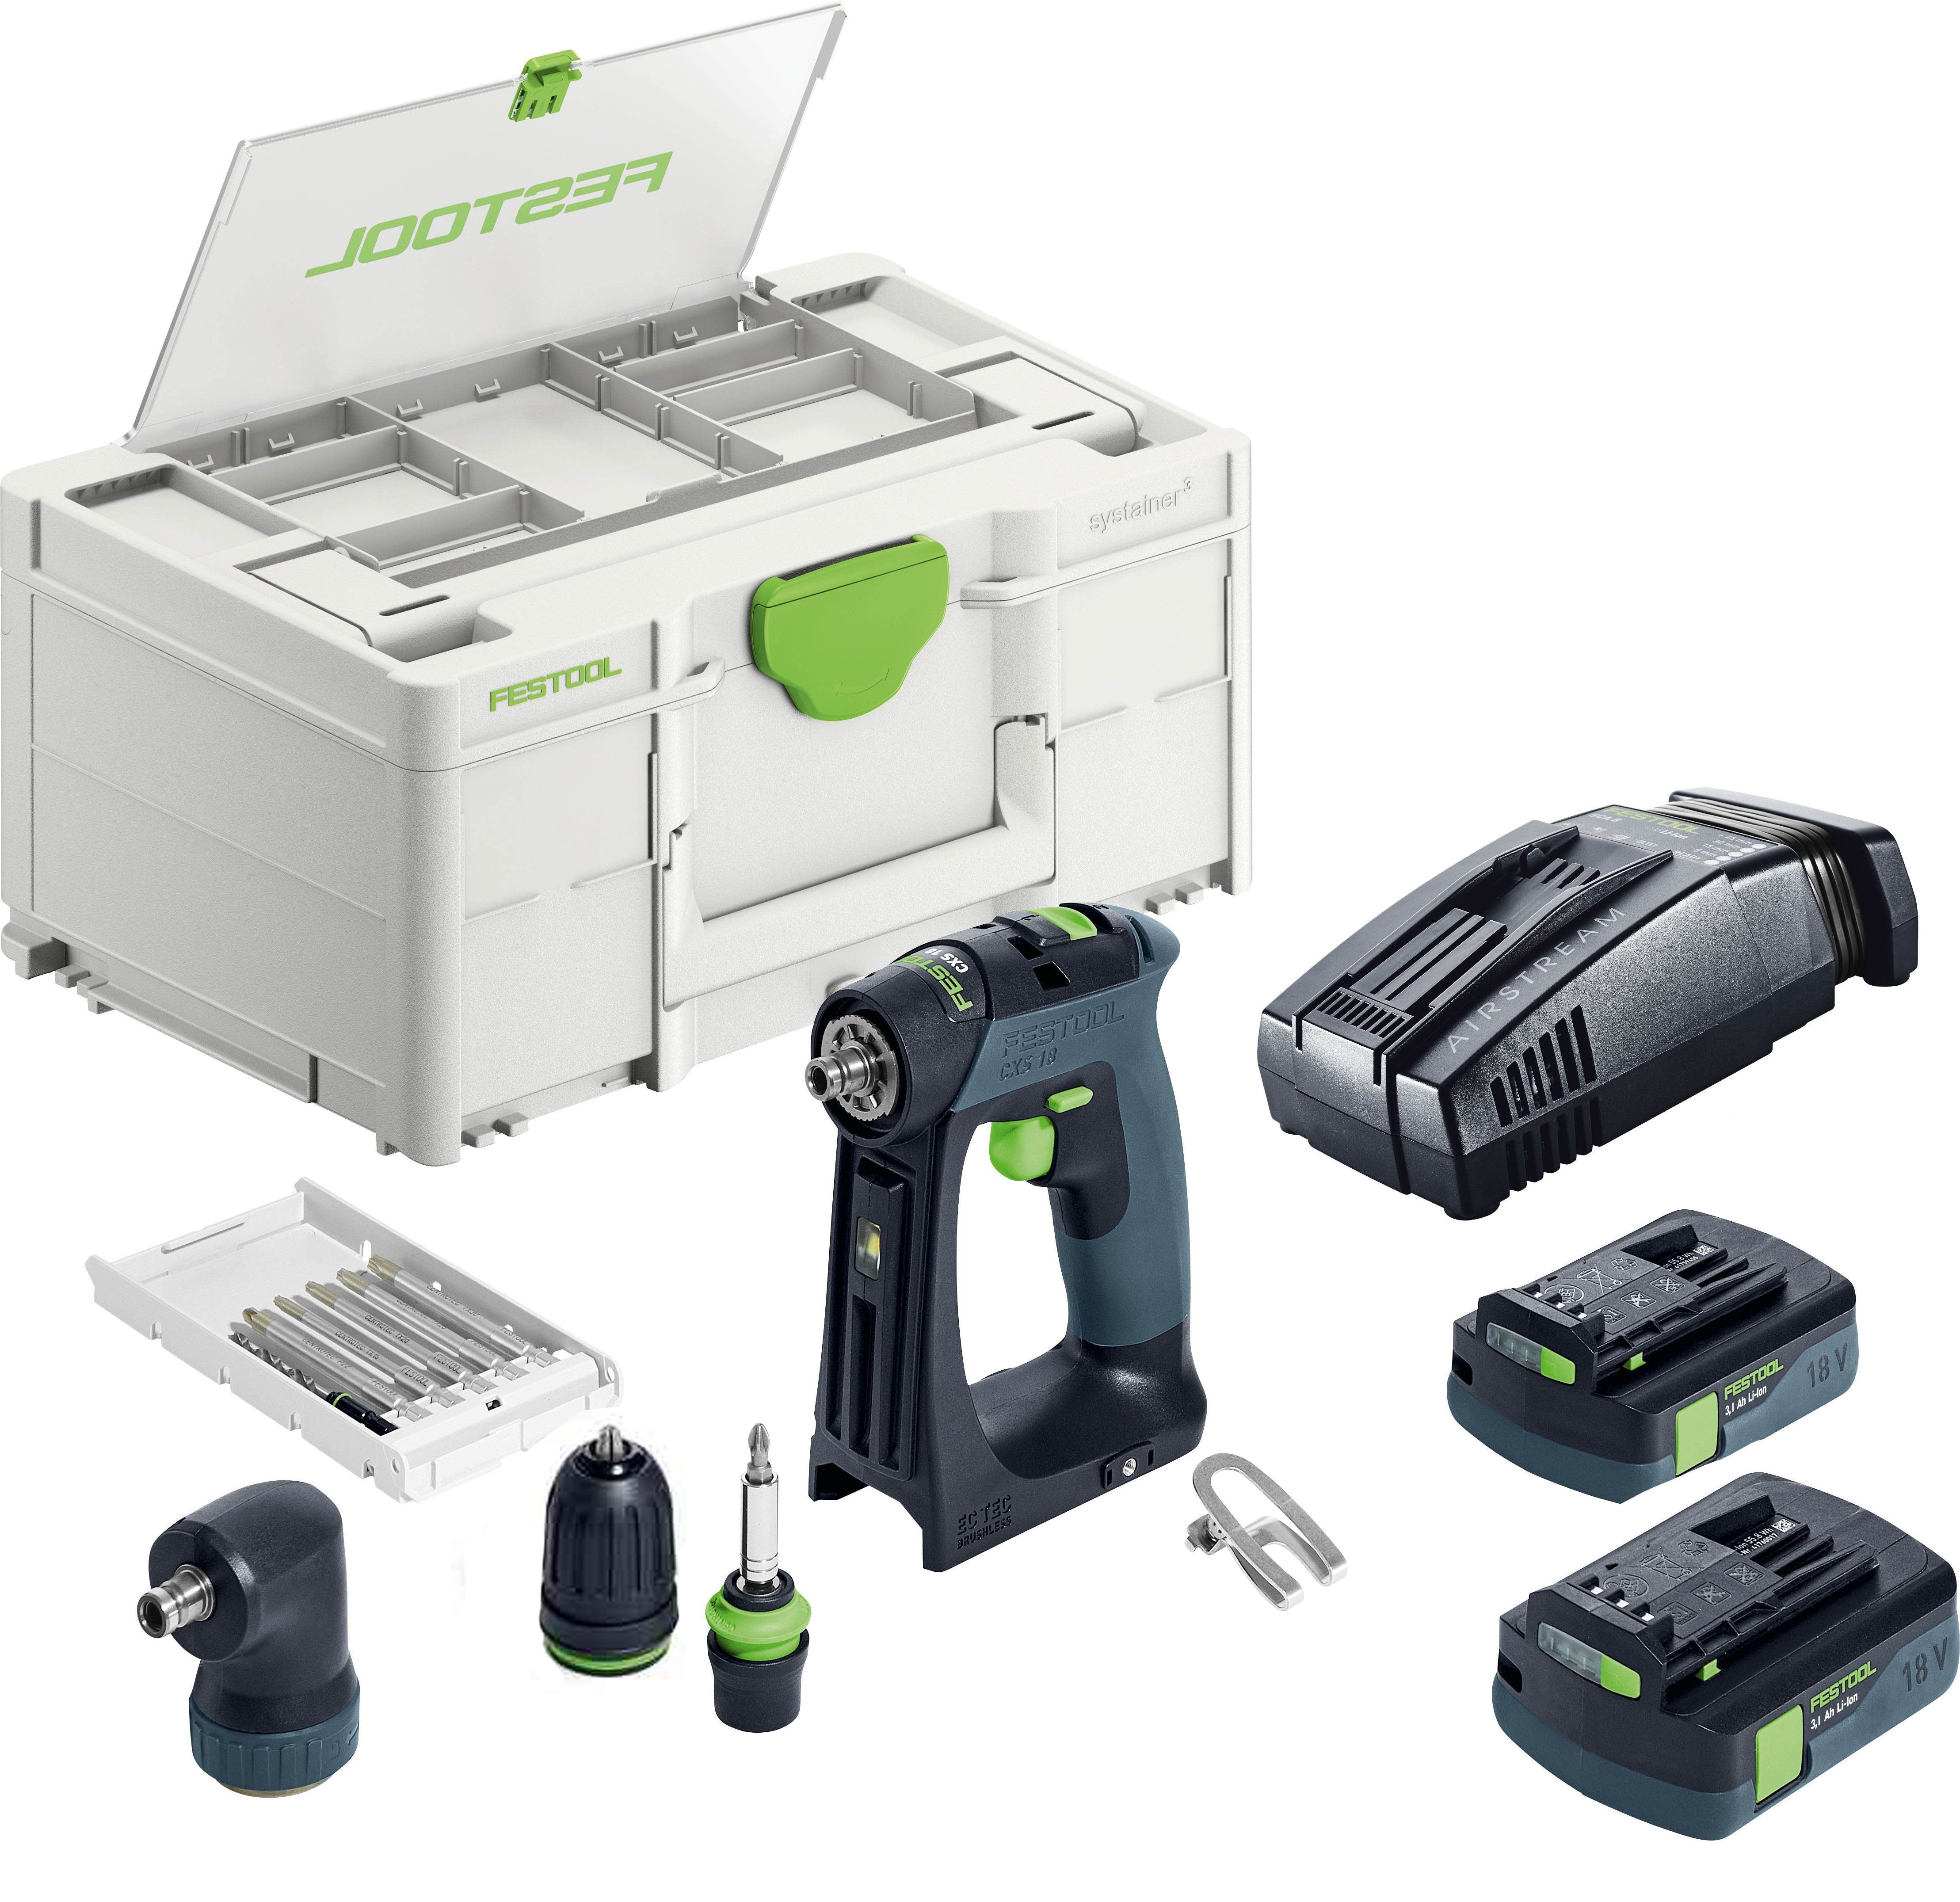 CXS 18V Cordless Compact 2 Speed Drill 3.0Ah Set & Angle Attachment in Systainer - 576884 by Festool